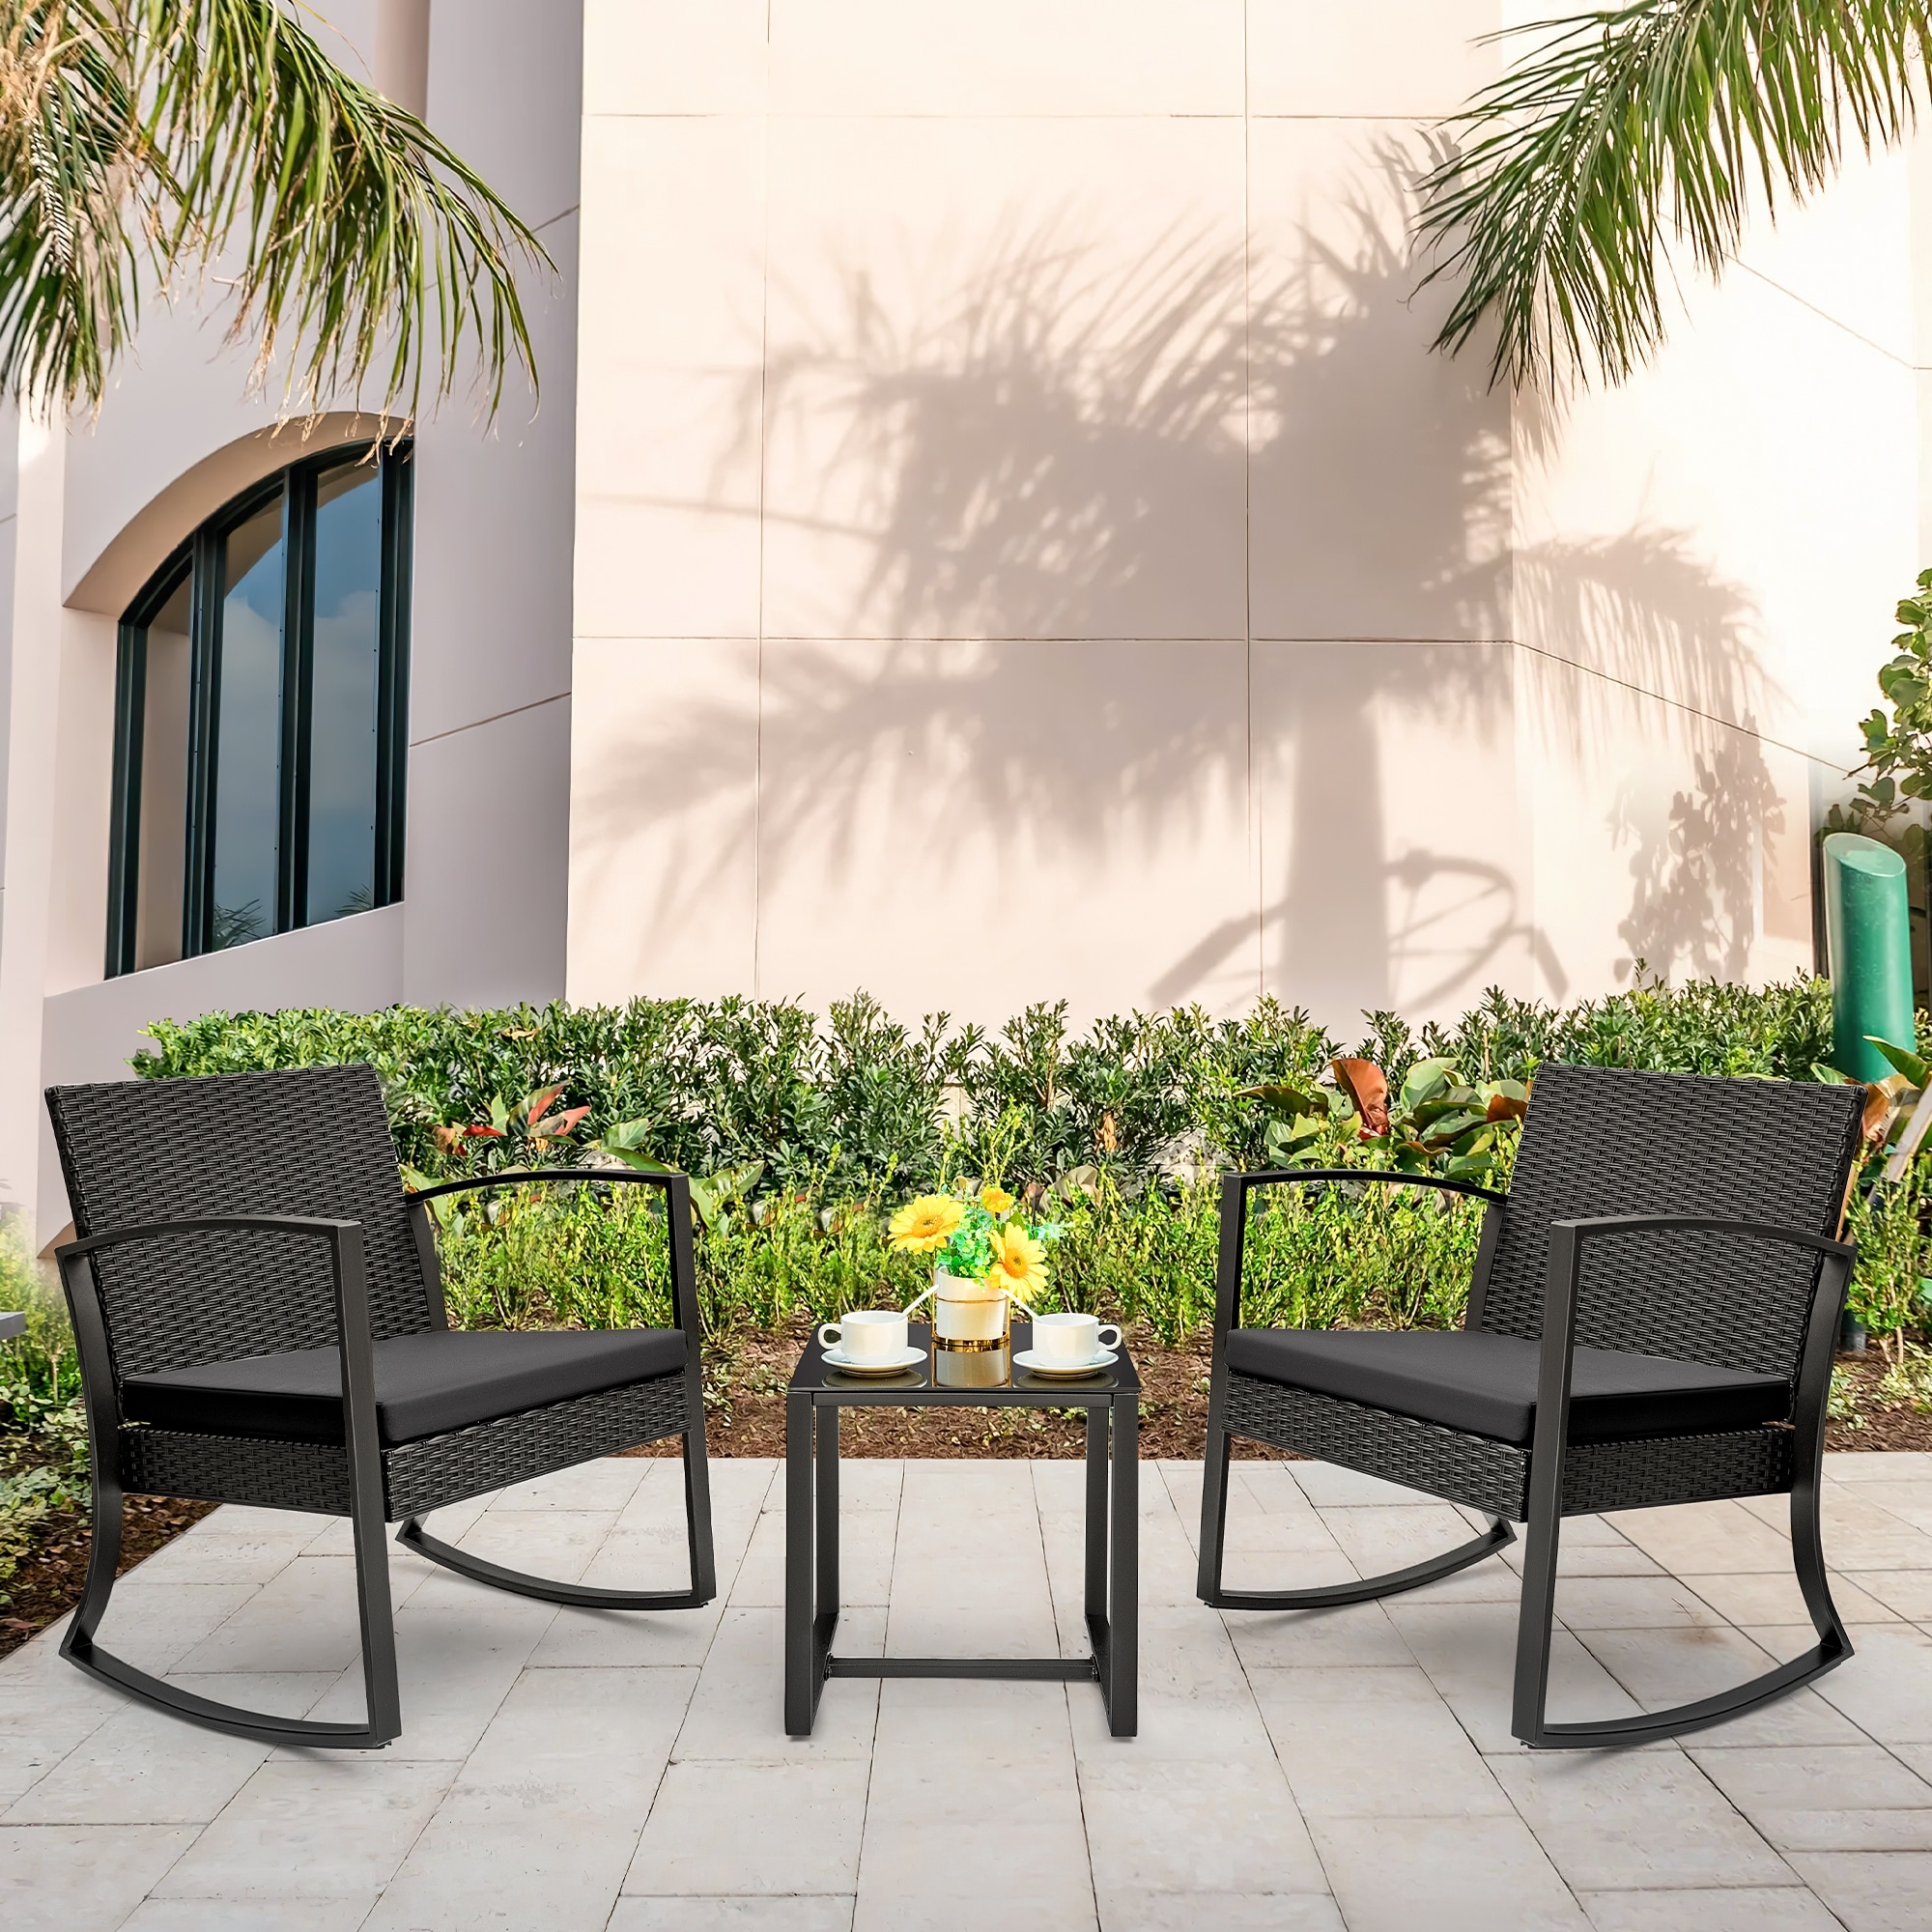 Homall Patio Furniture Set Outdoor Rocking Chair With Cushion Set Of 3